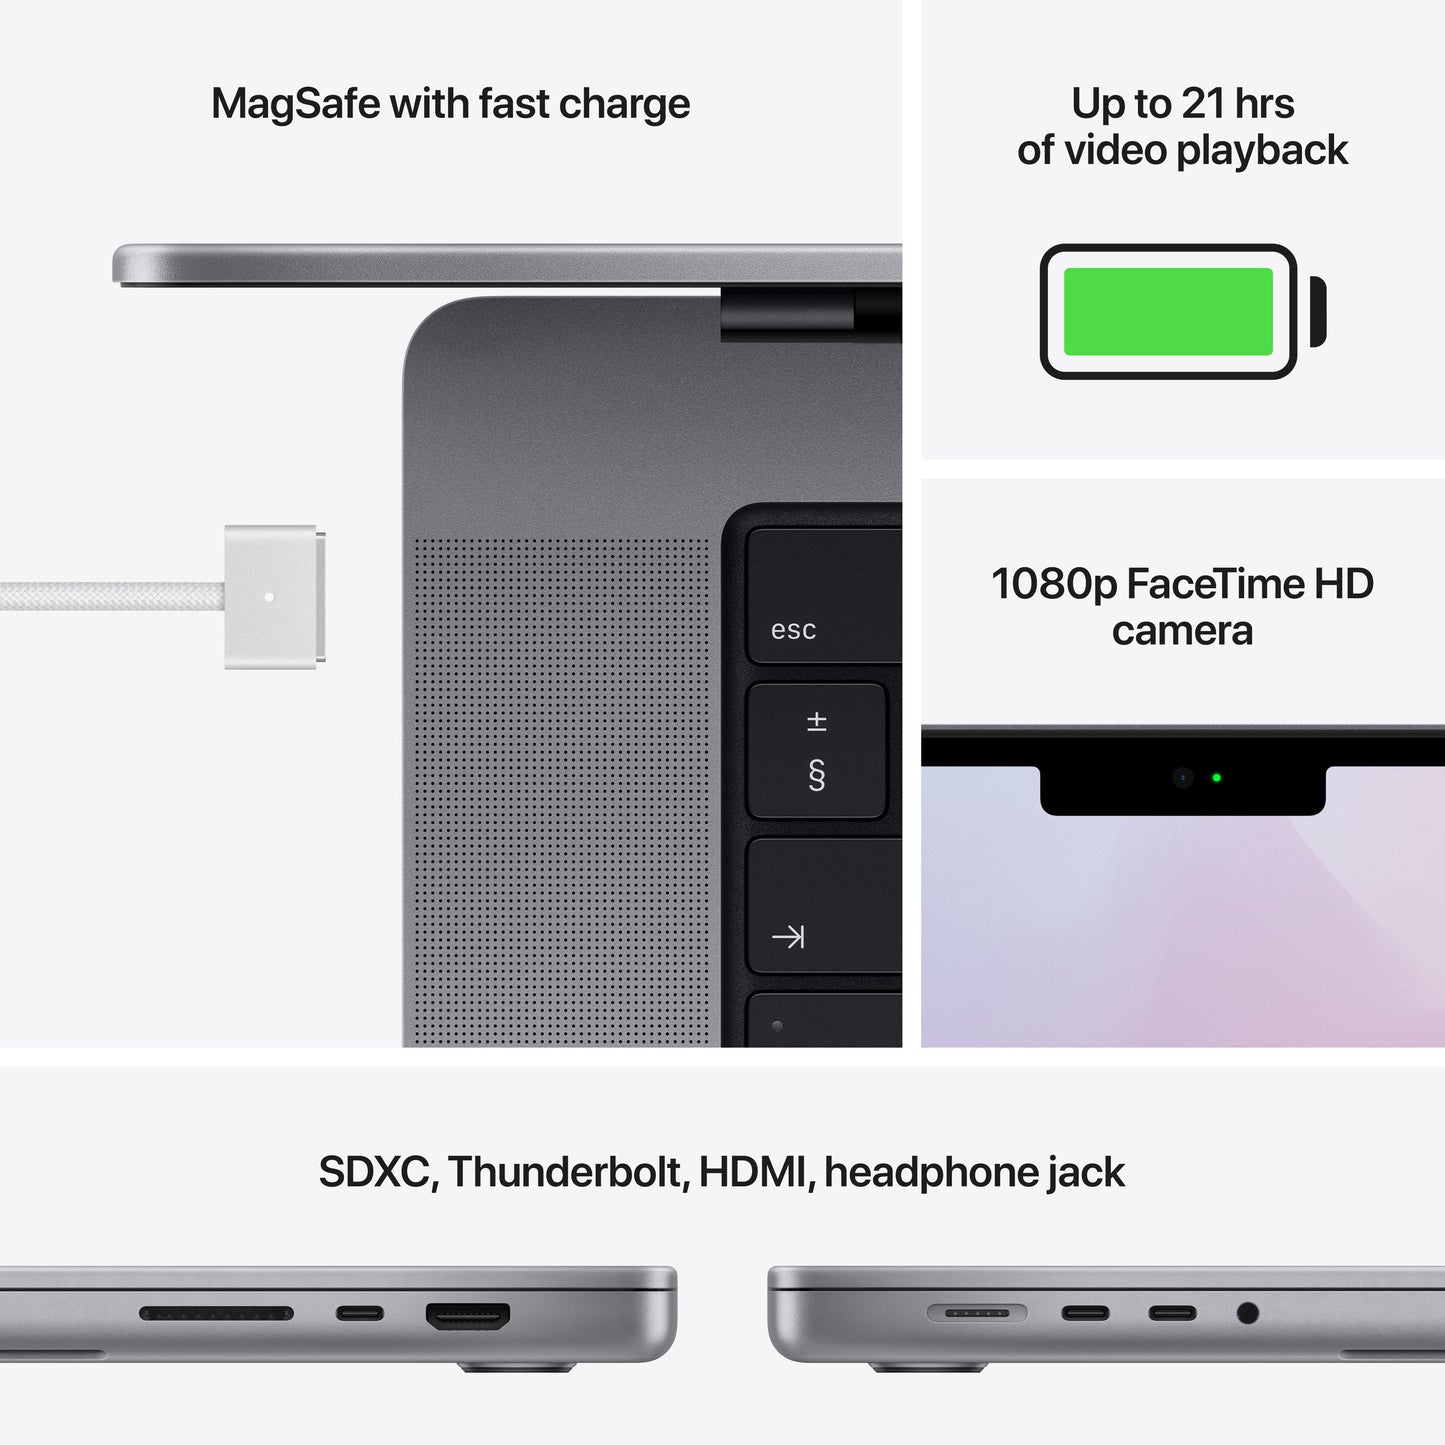 16-inch MacBook Pro: Apple M1 Pro chip with 10?core CPU and 16?core GPU, 512GB SSD - Space Grey